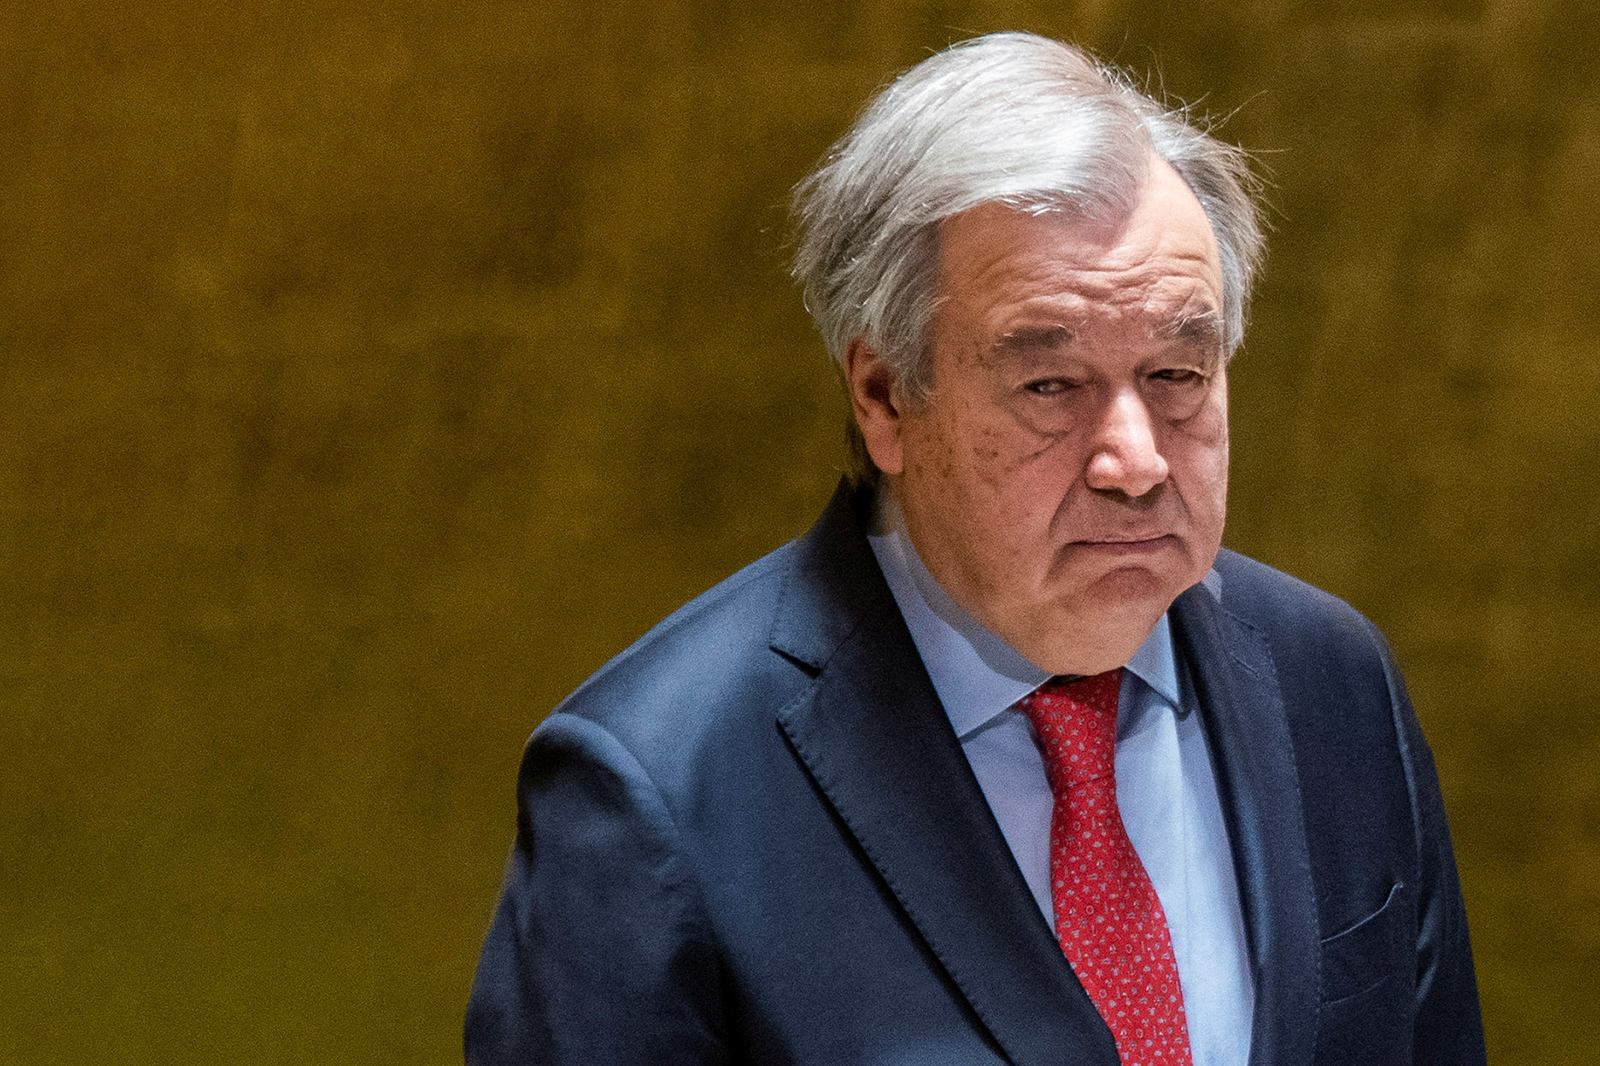 UN chief’s somber warning: Prospects for peace in Ukraine are diminishing as world faces a wider struggle